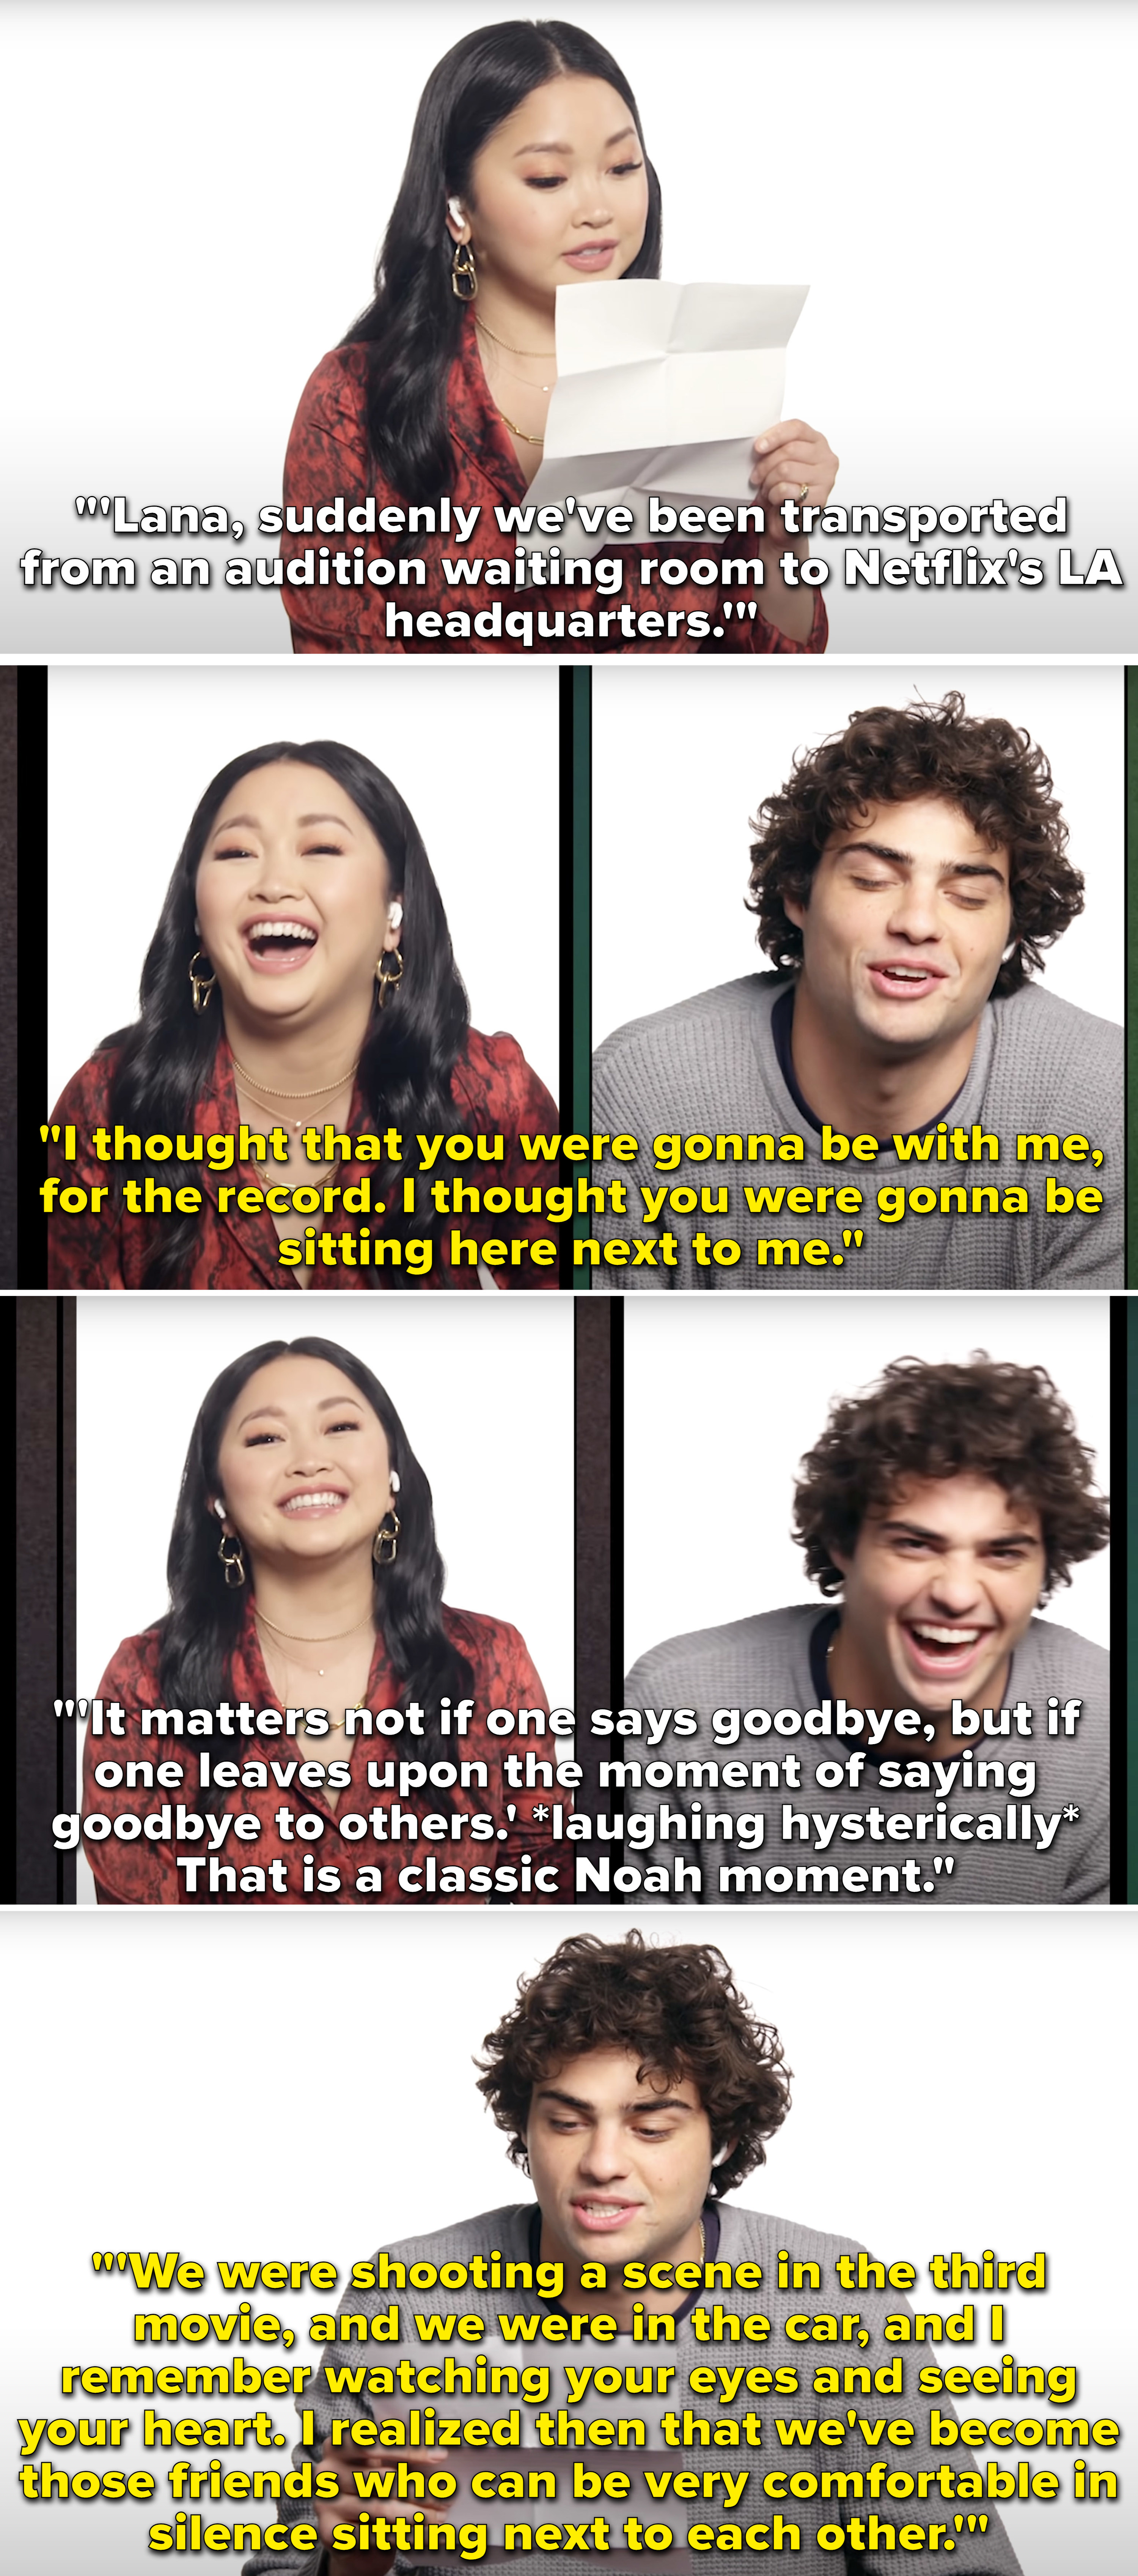 Noah Centineo and Lana Condor talking about the progression of their friendship